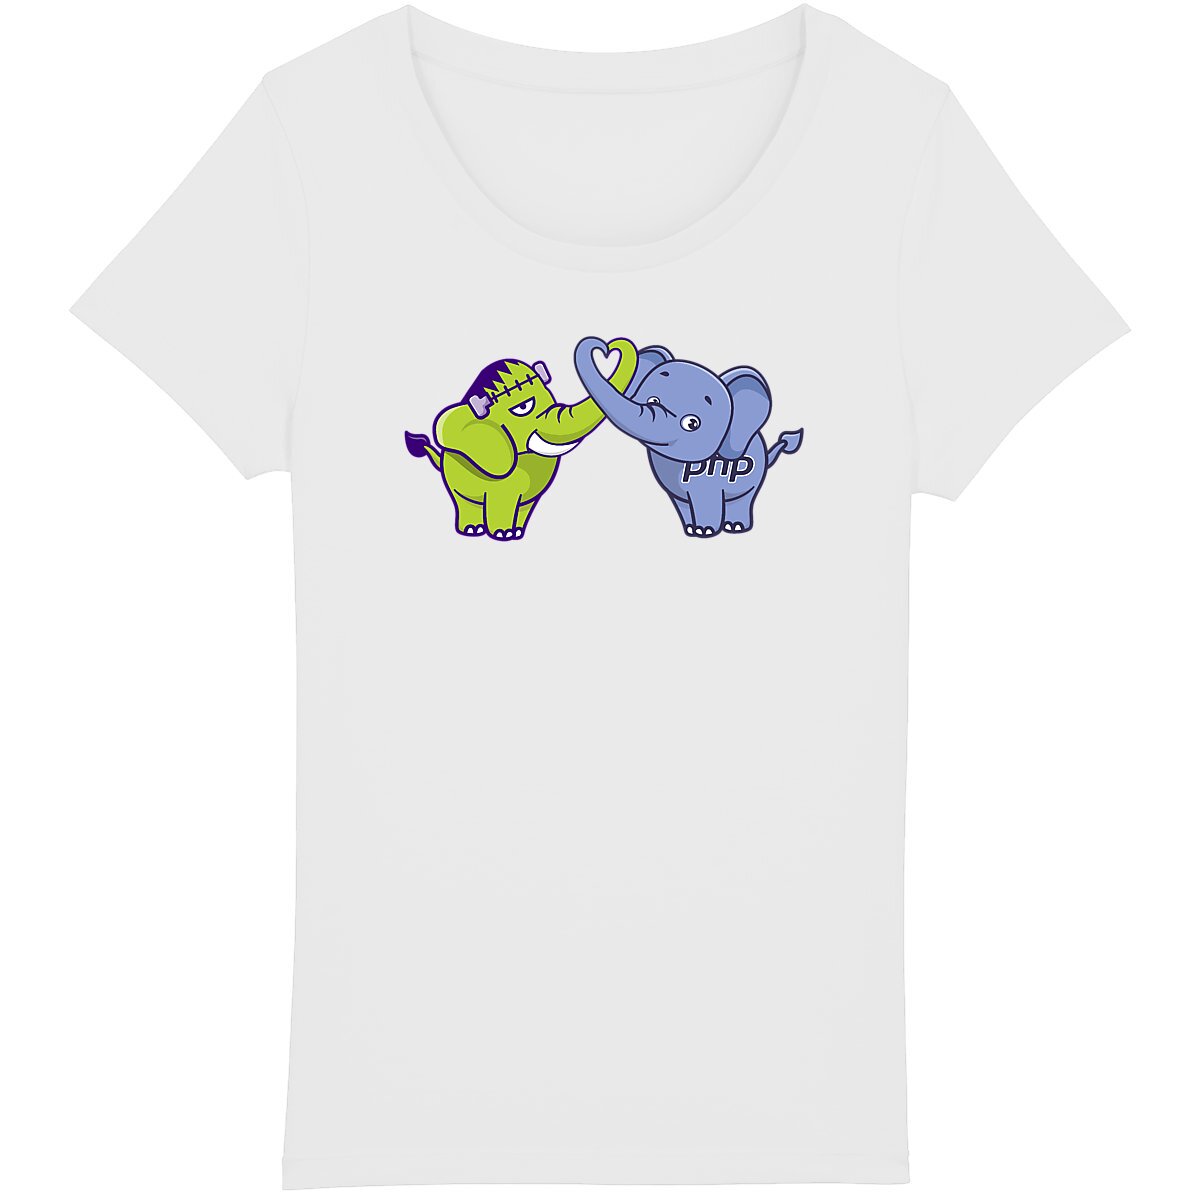 Women's T-shirt PHP Lover